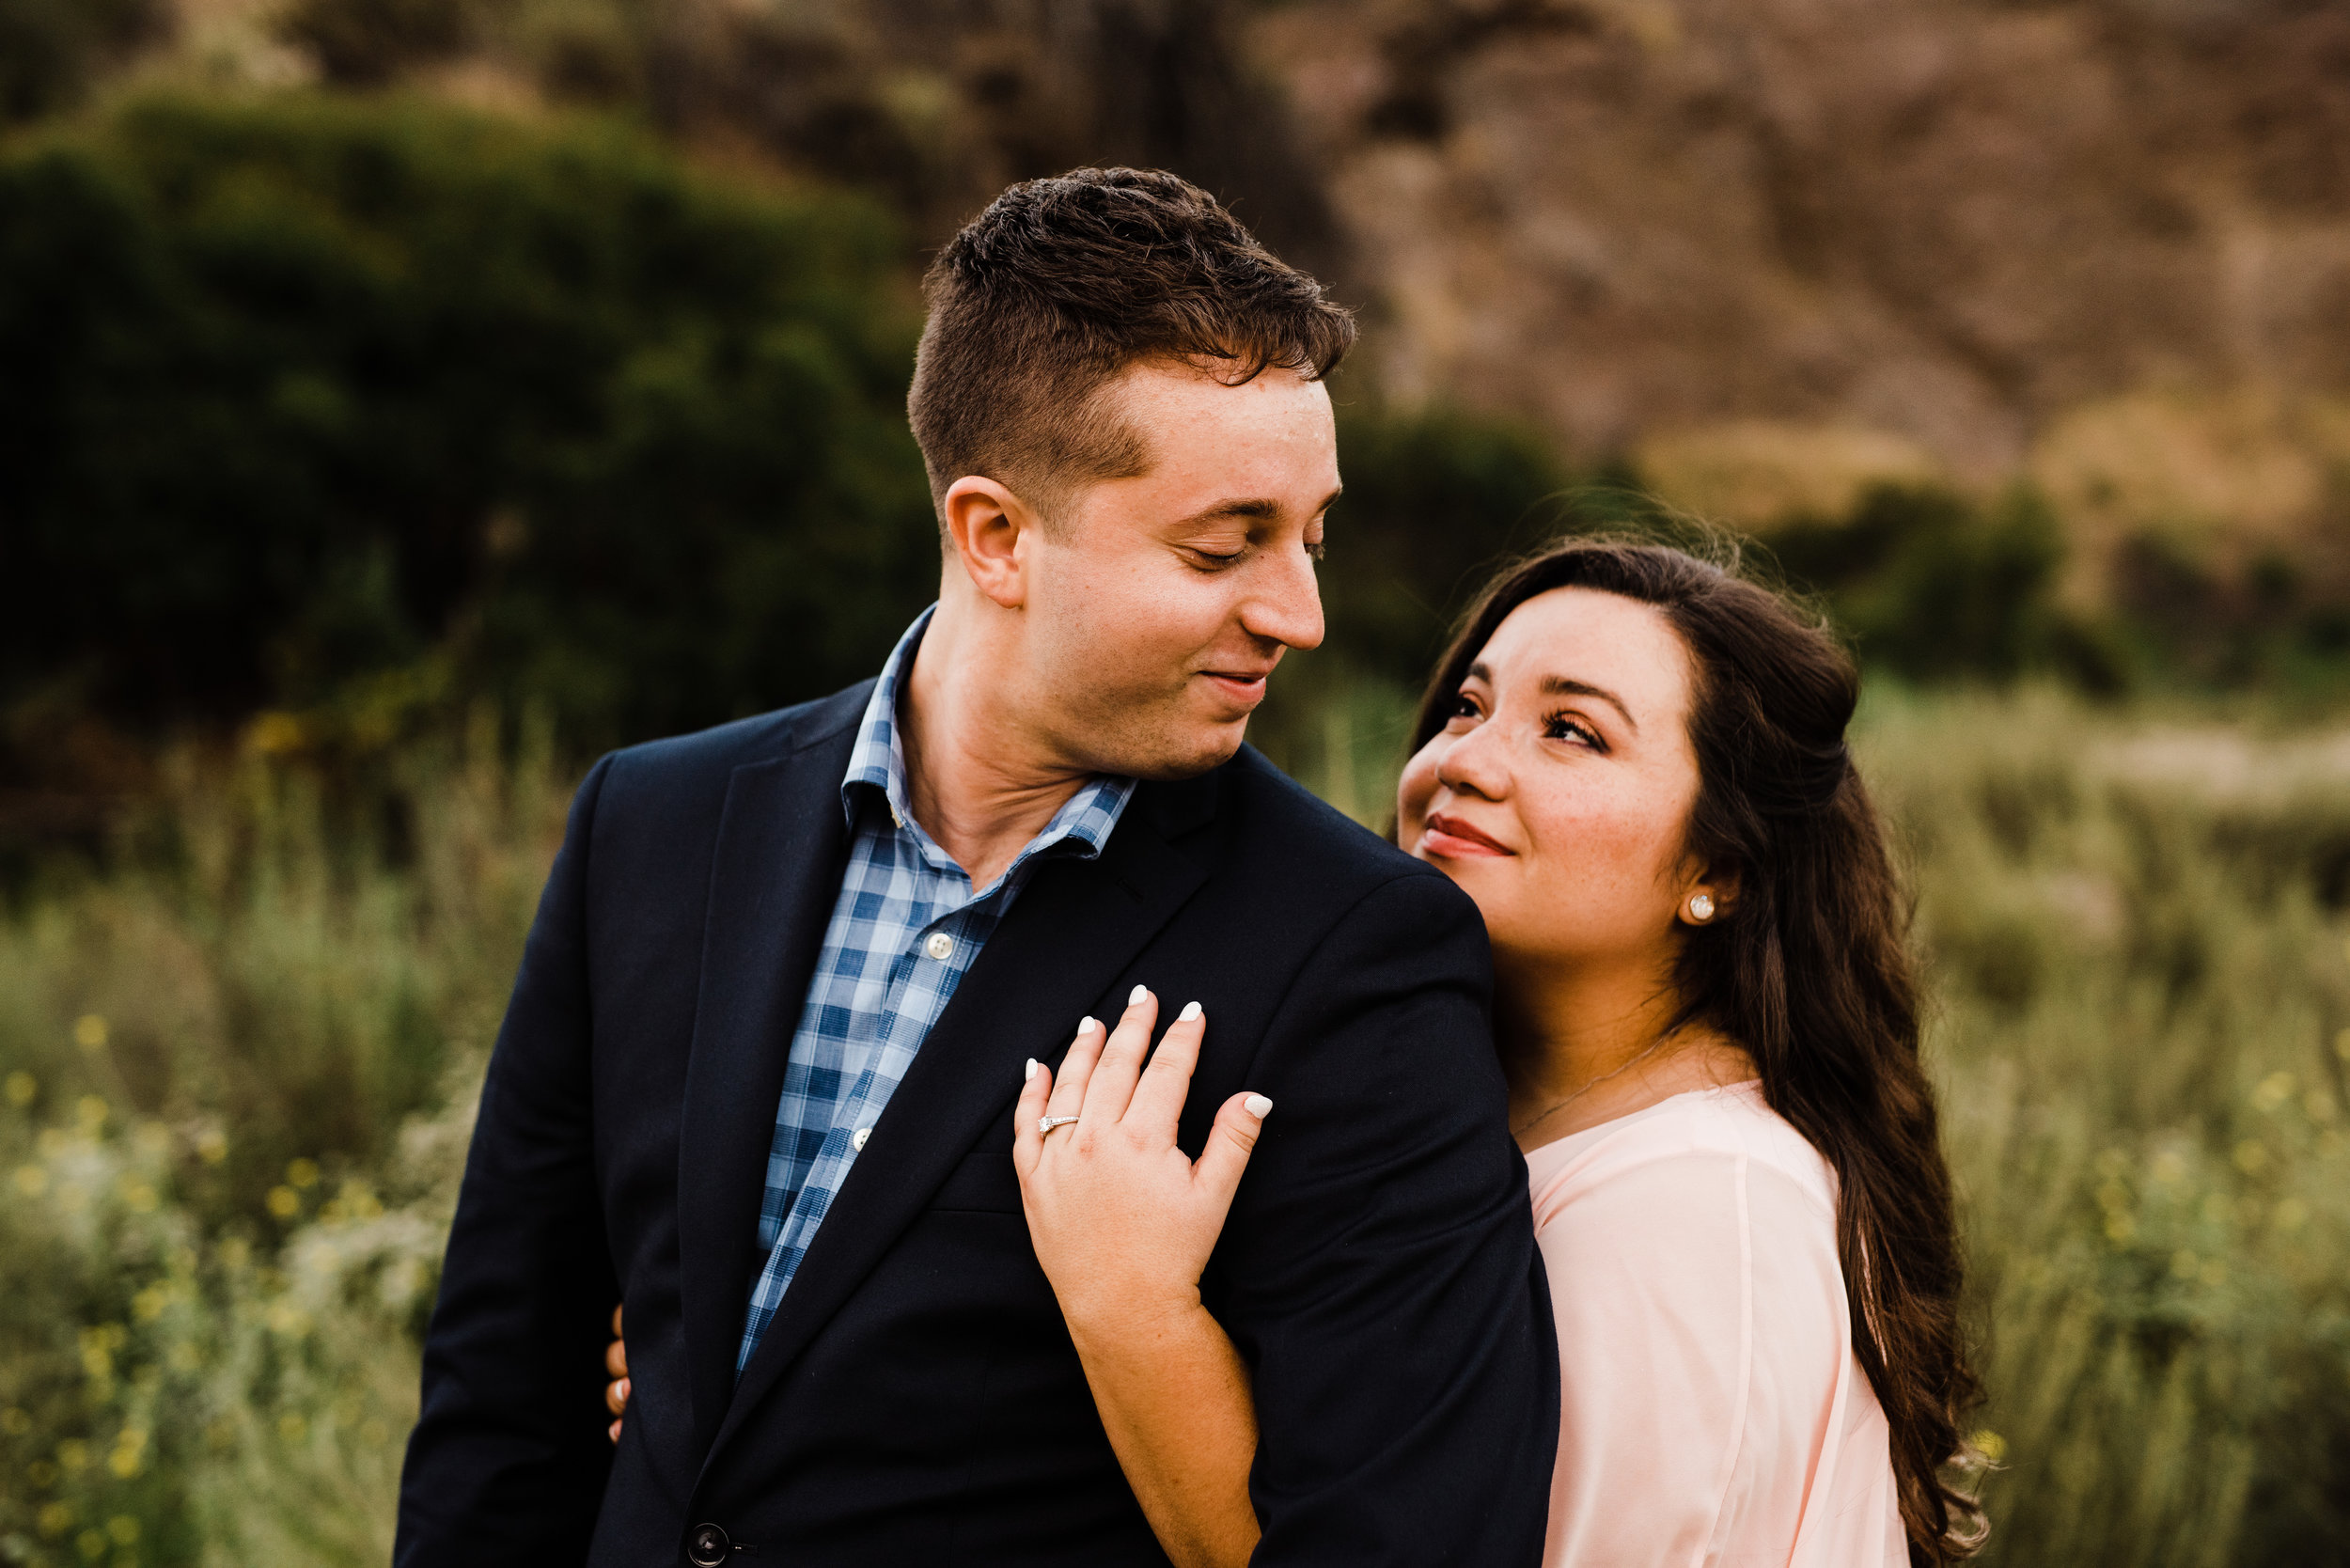 Semi-formal engagement outfits at adventurous engagement session in LA